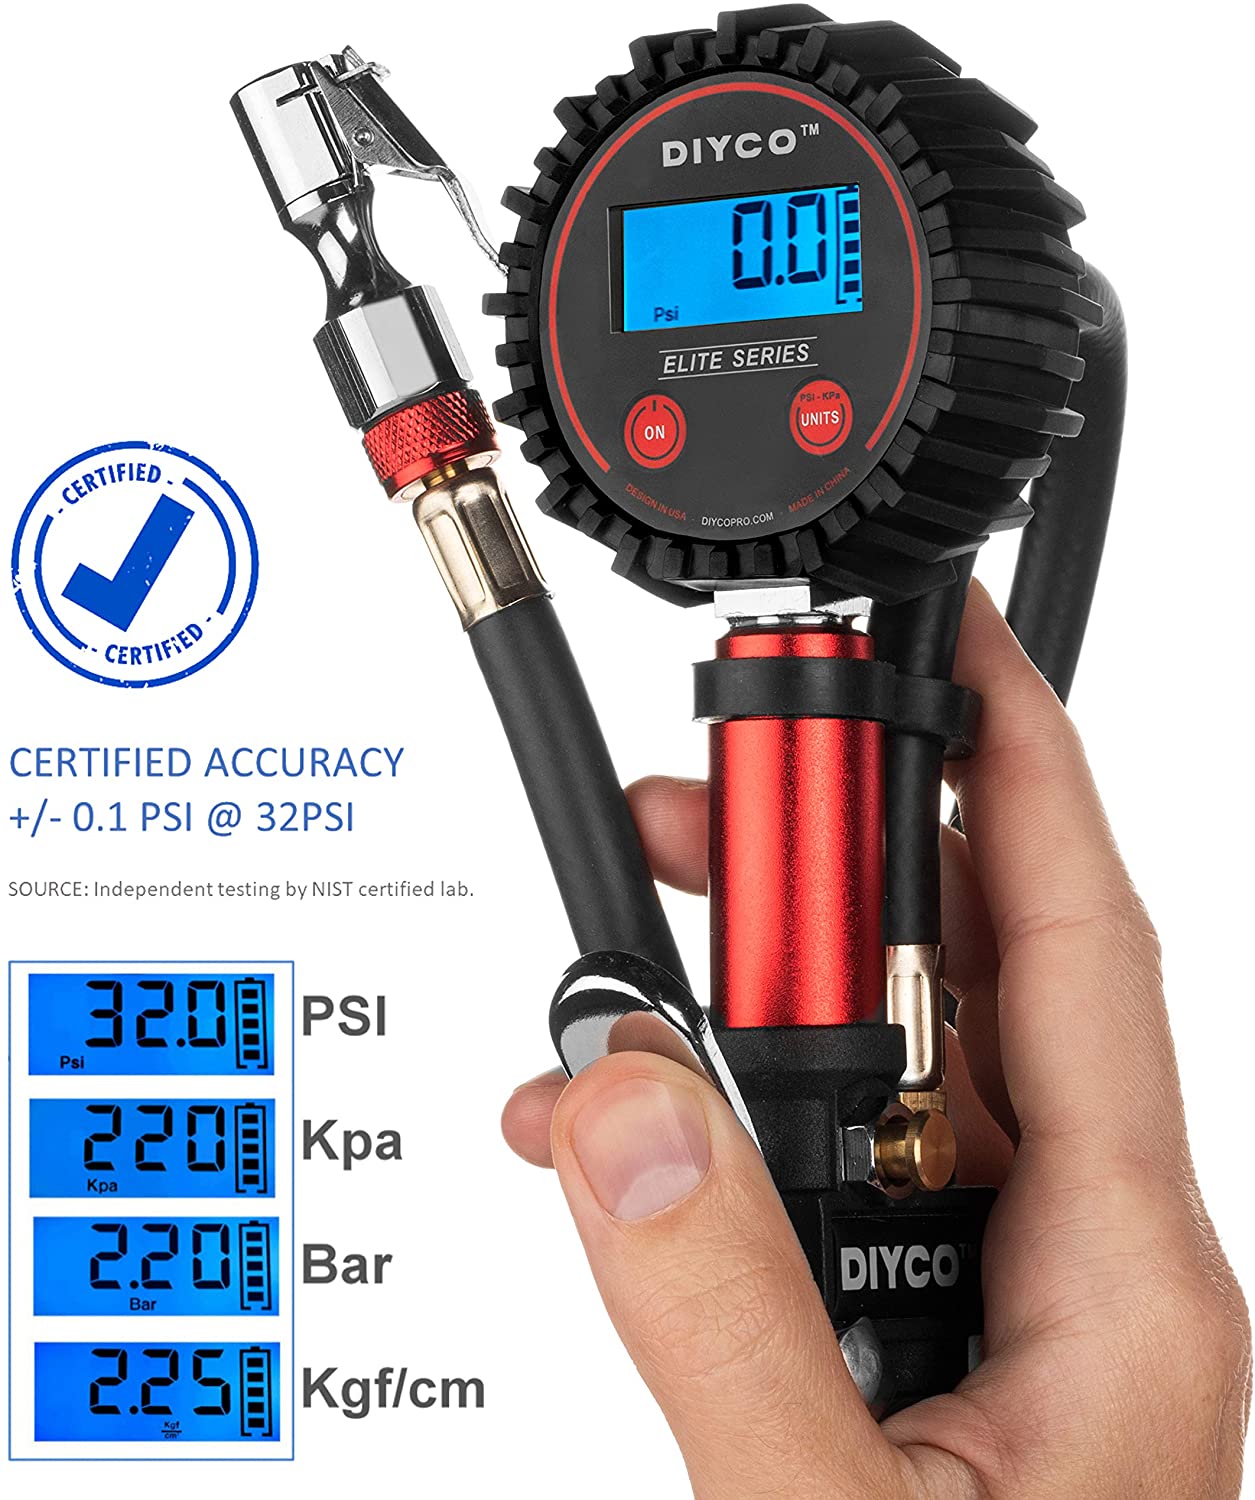 DIYCO D3 Plus Digital Tire Inflator with Pressure Gauge | 150 PSI (0.1 Res) | Interchangeable Air Chuck | 7-PCS Compressor Accessory Kit | Professional & Home Garage | Elite Series - (For 6 piece(s))